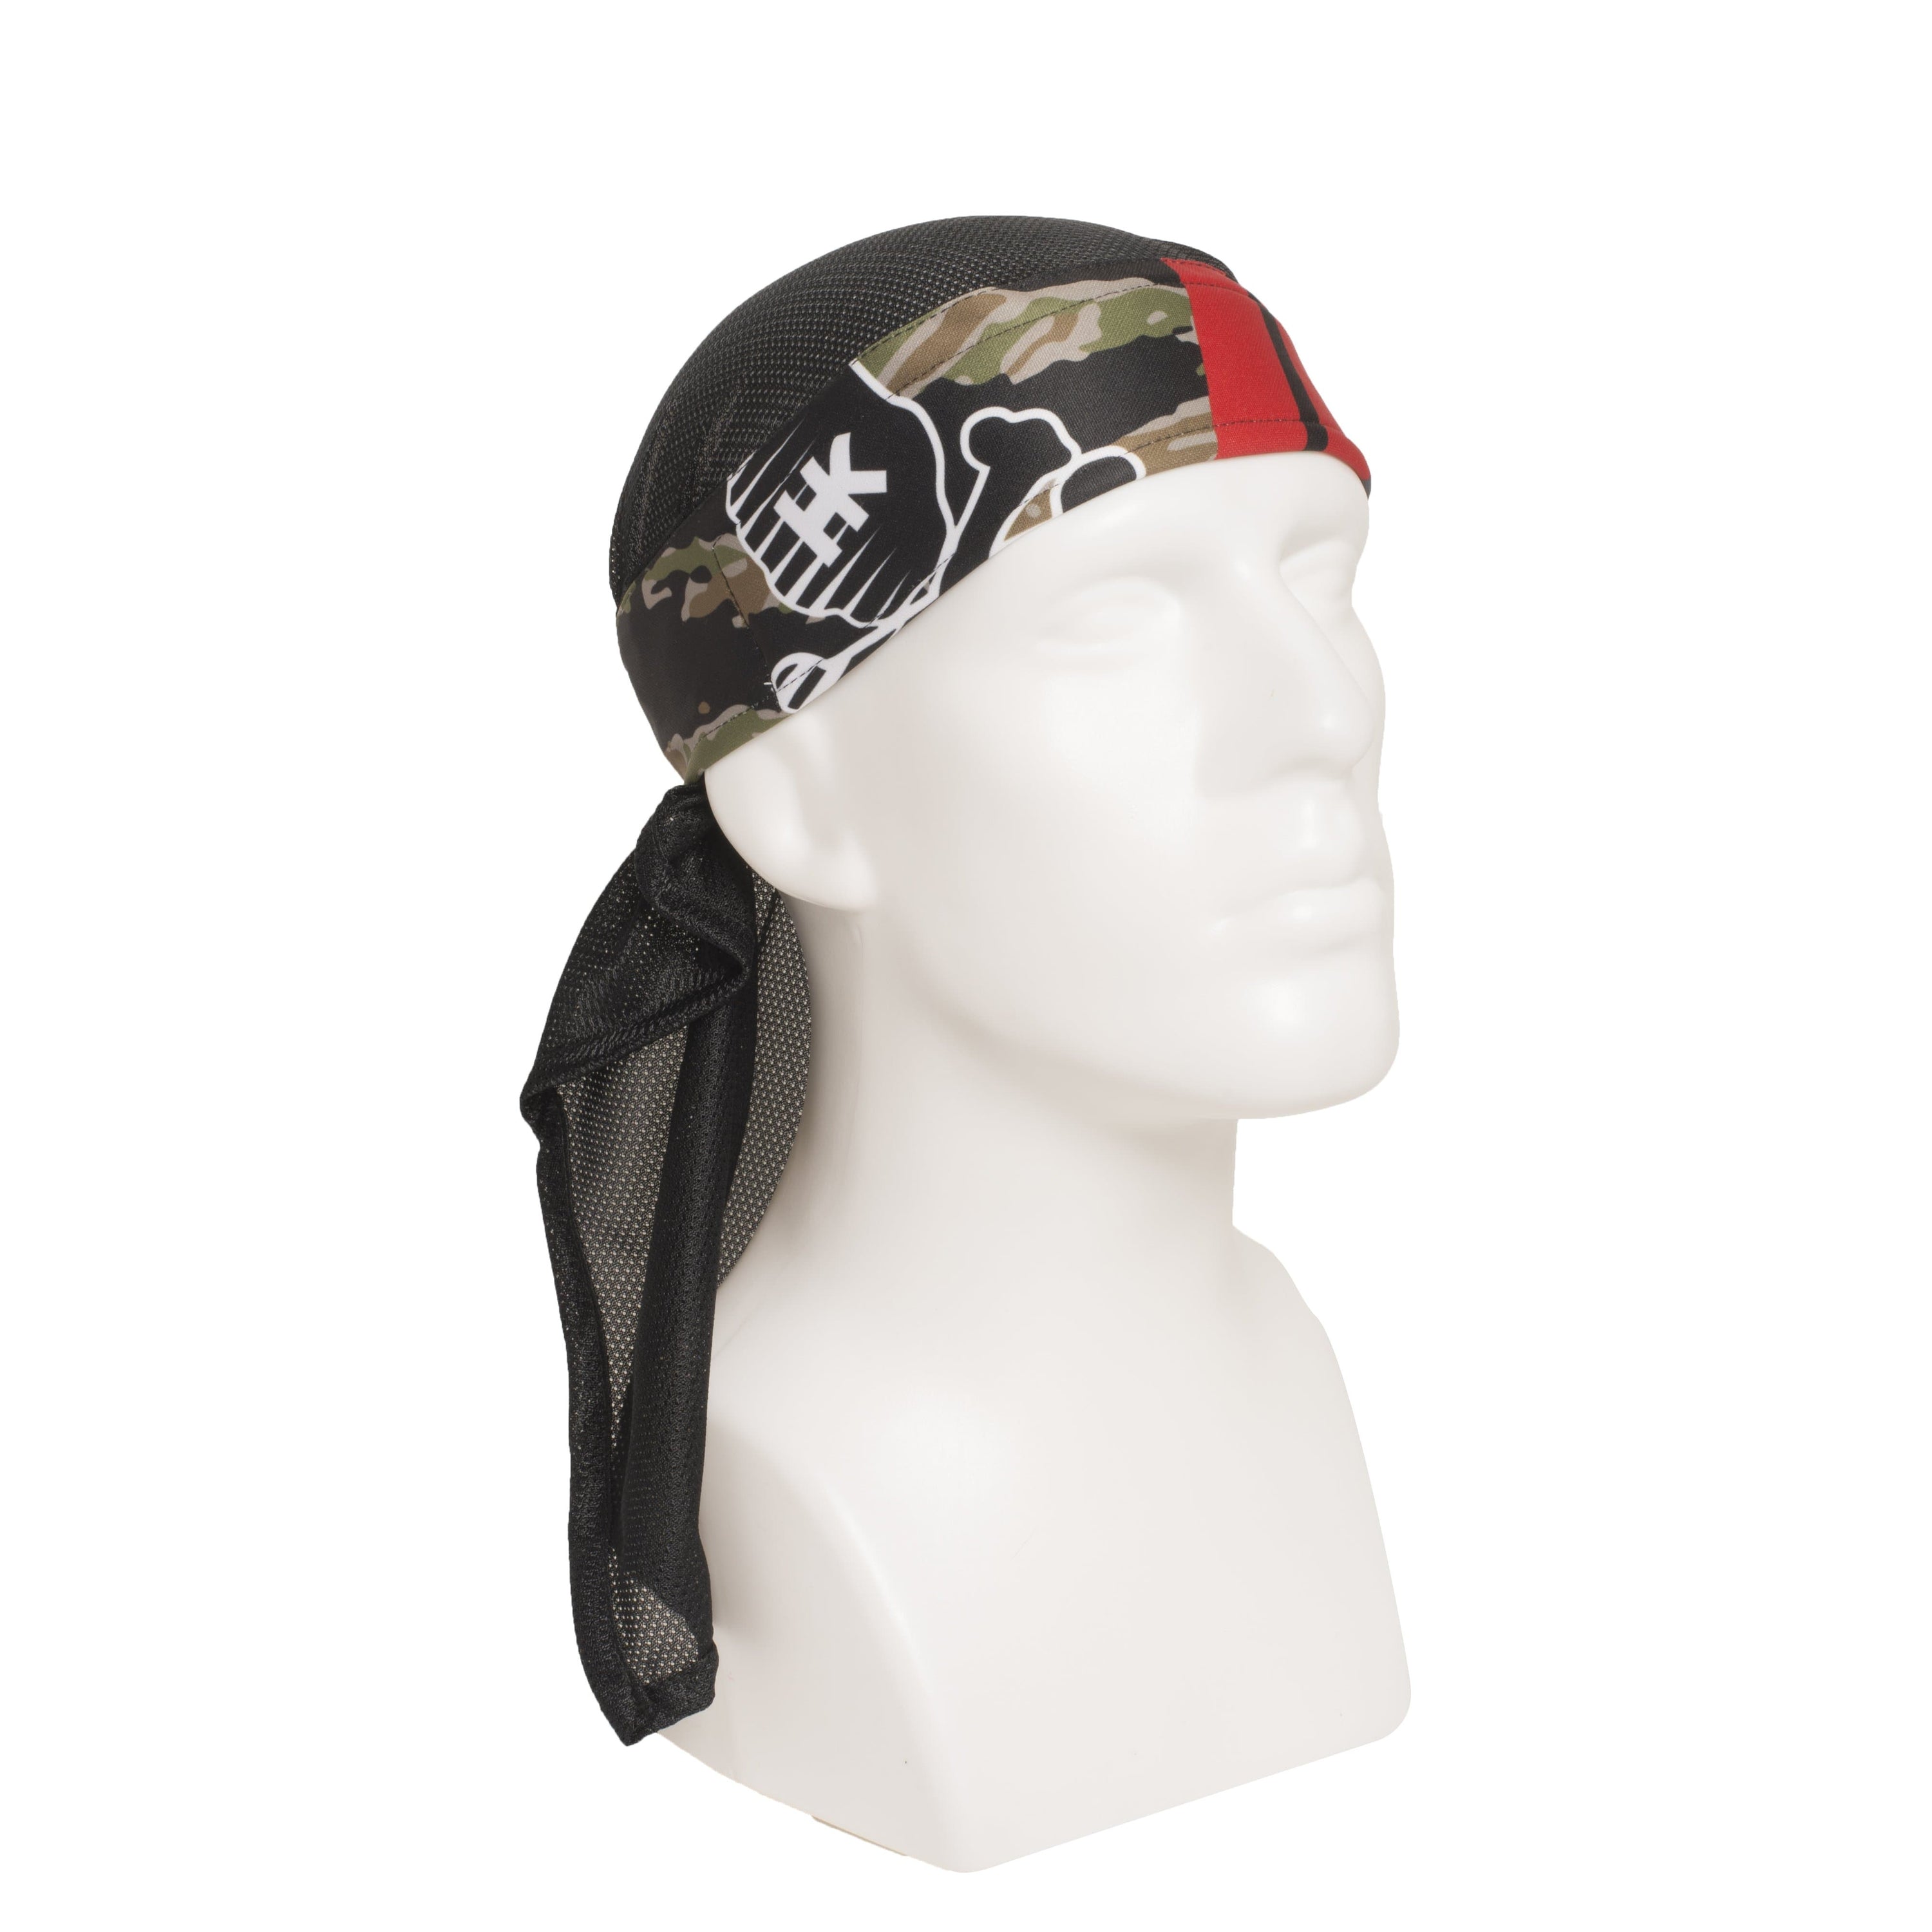 MR. H Slayer Woodland Headwrap - Eminent Paintball And Airsoft